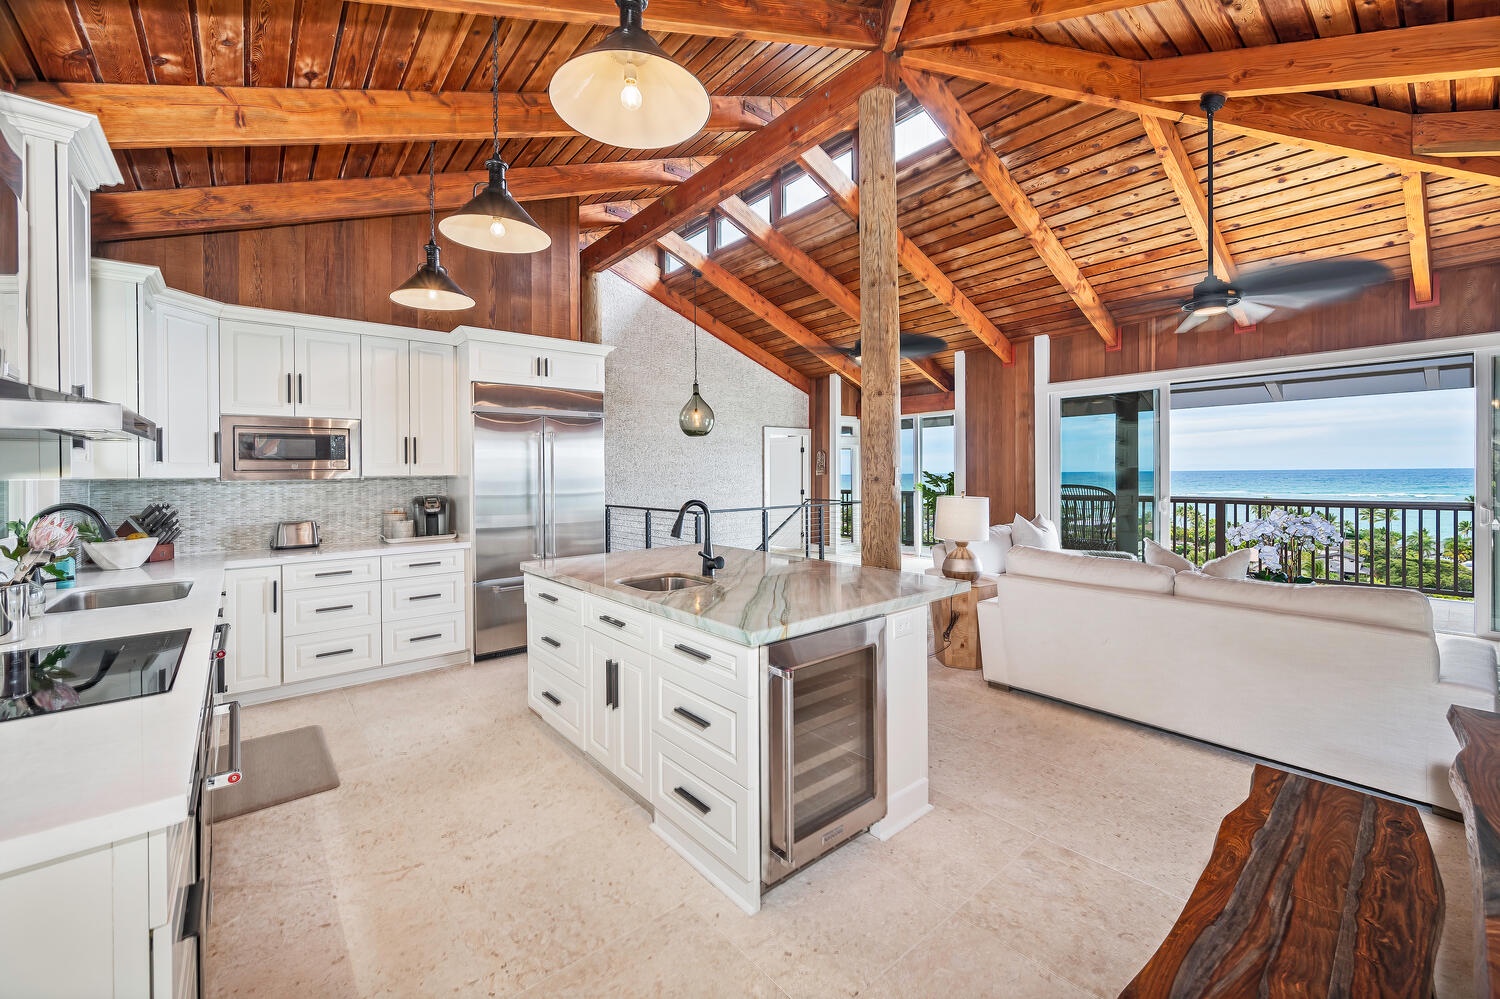 Kailua Vacation Rentals, Hale Lani - Gourmet kitchen overlooks living with panoramic landscape views